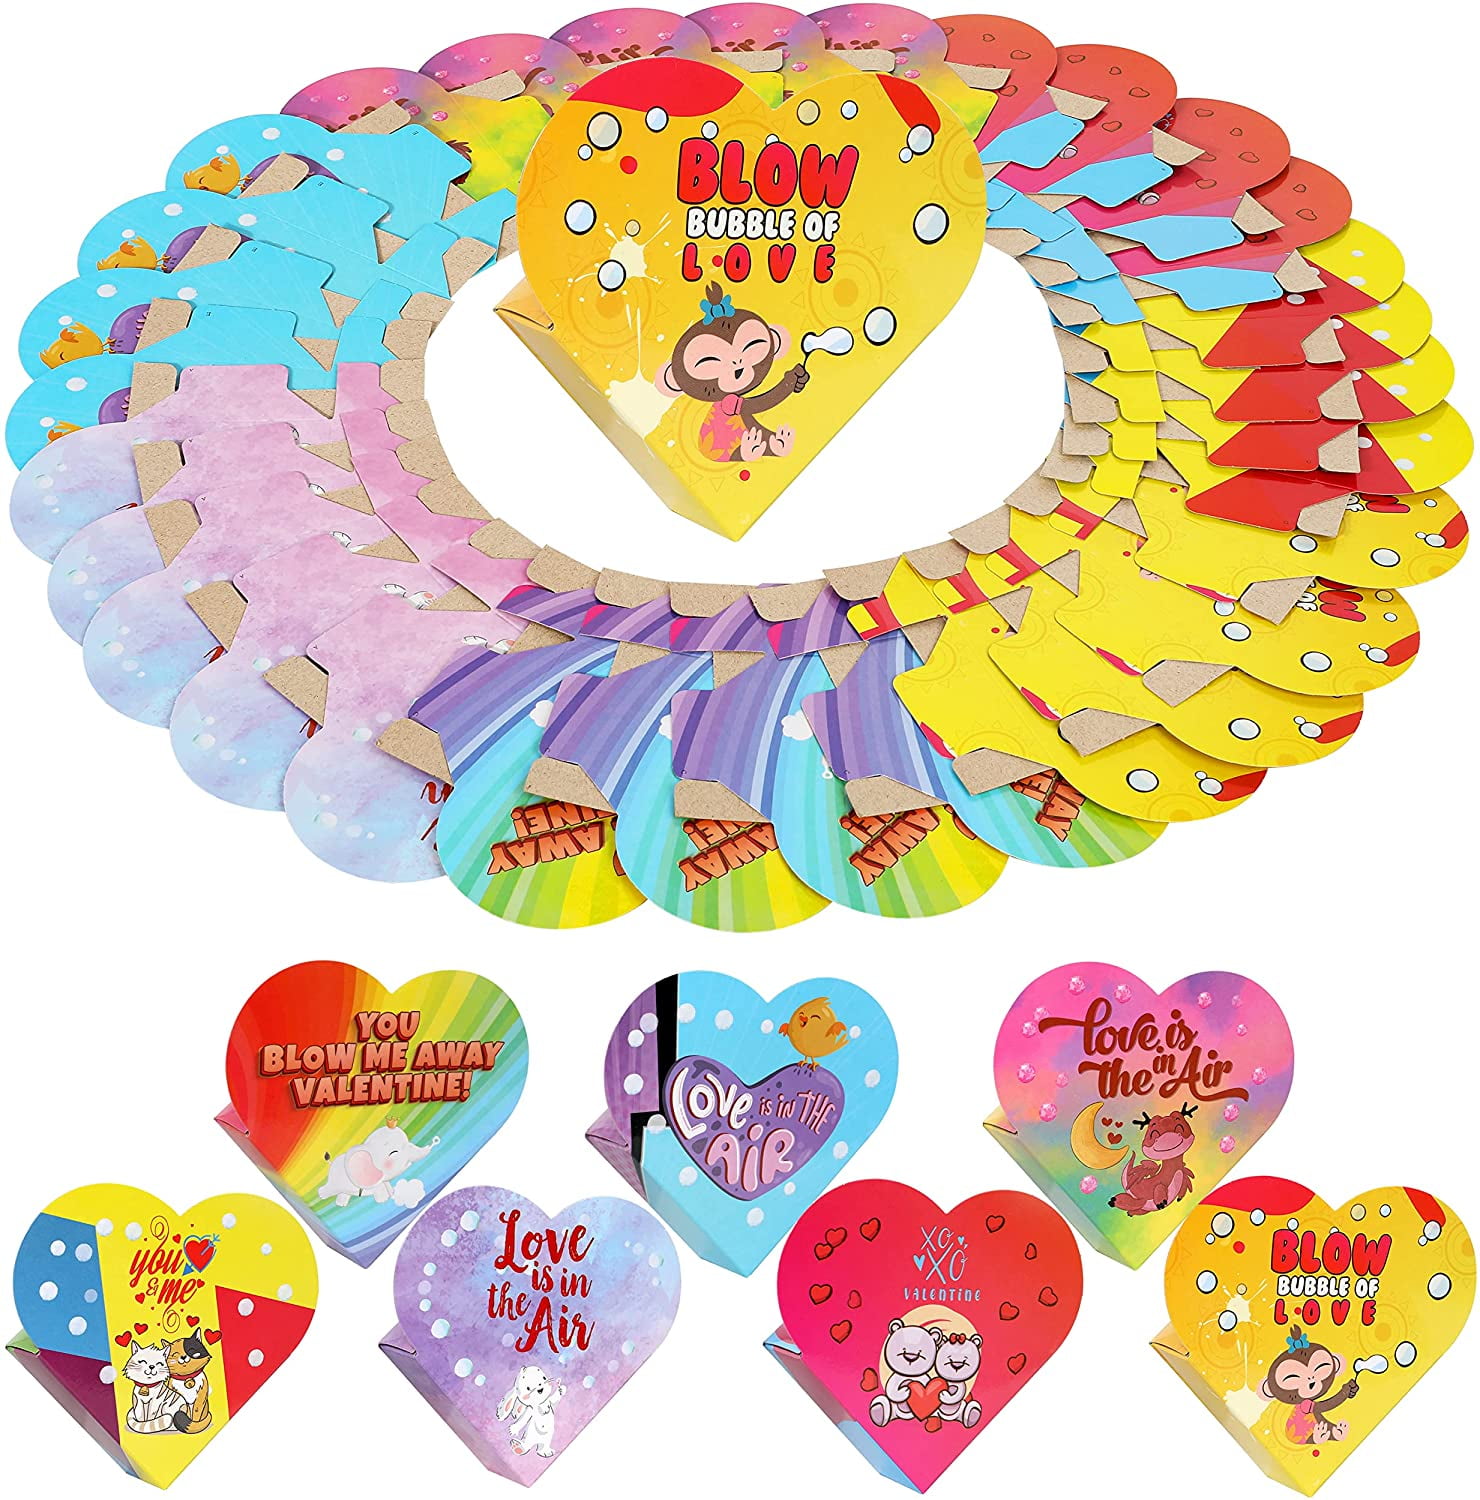 28 Packs Valentine Bubble Bottles with Heart Boxes Party Favors Gift Exchange Bubble Bottles Necklaces and Bubble Solution for Kids Valentine Party Favors Classroom Exchange Game Prizes 